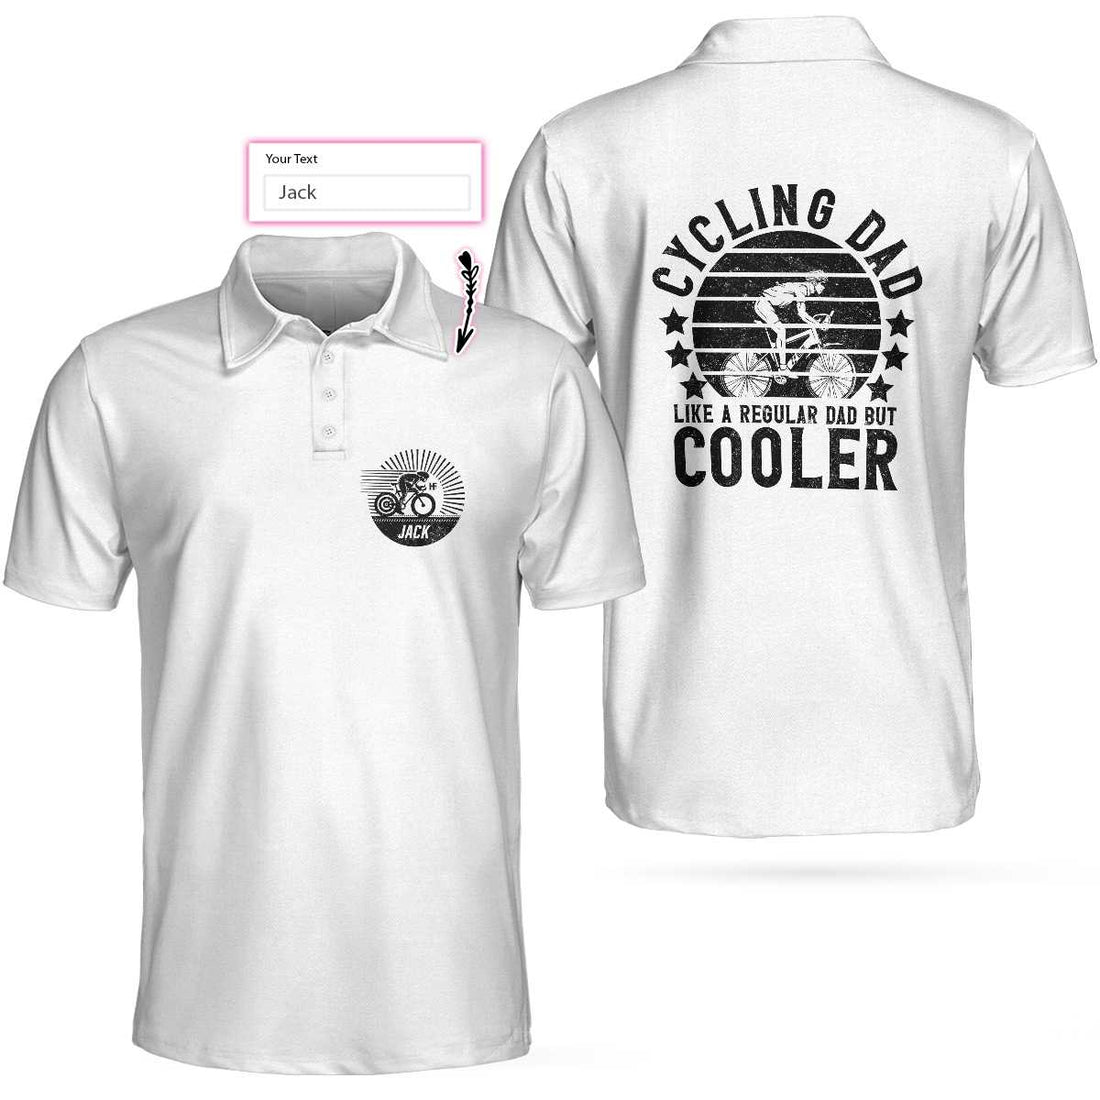 Cycling Dad Like A Regular Dad But Cooler Custom Polo Shirt Personalized Black And White Cycling Shirt For Men - 1